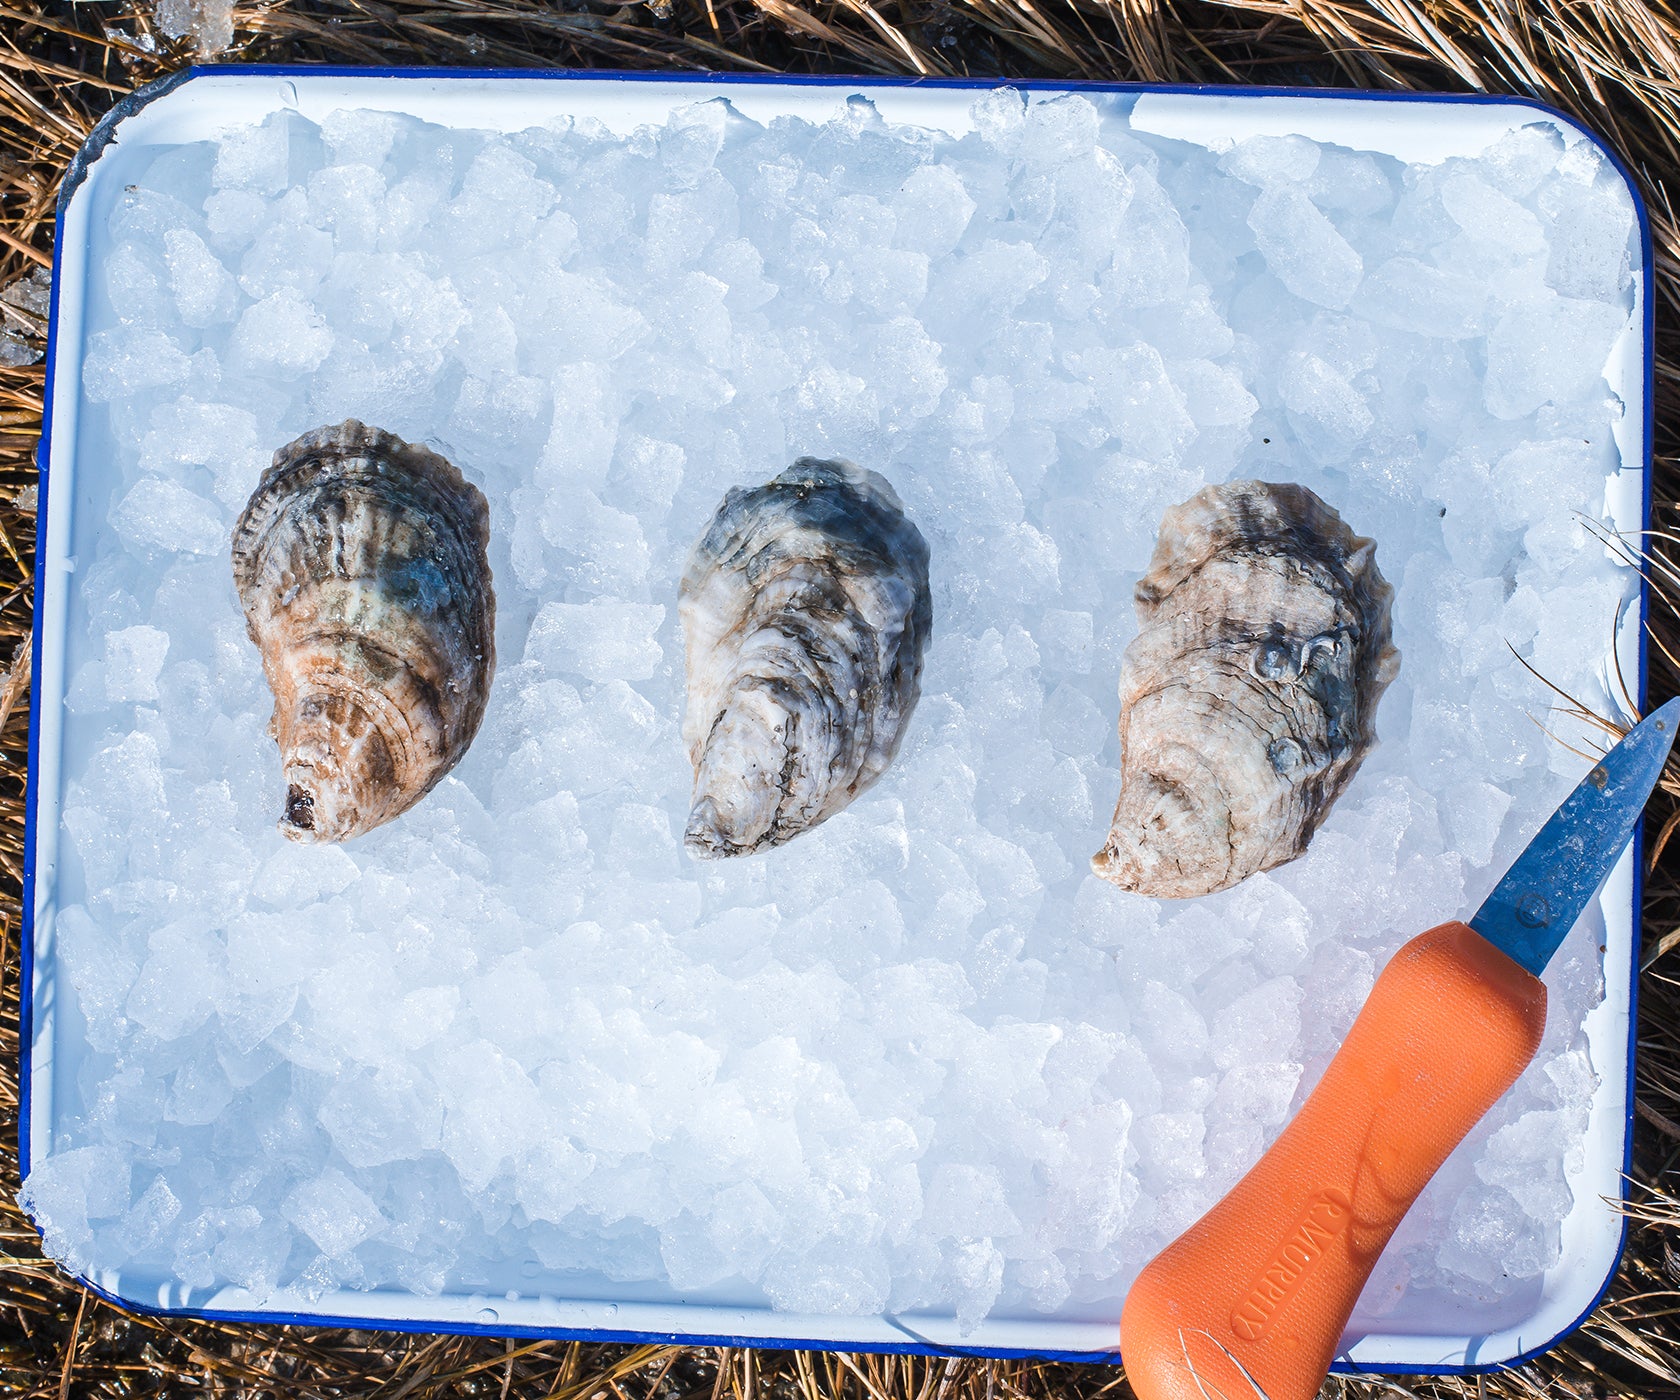 Northern Cross Oysters from Fisherman’s Island, VA